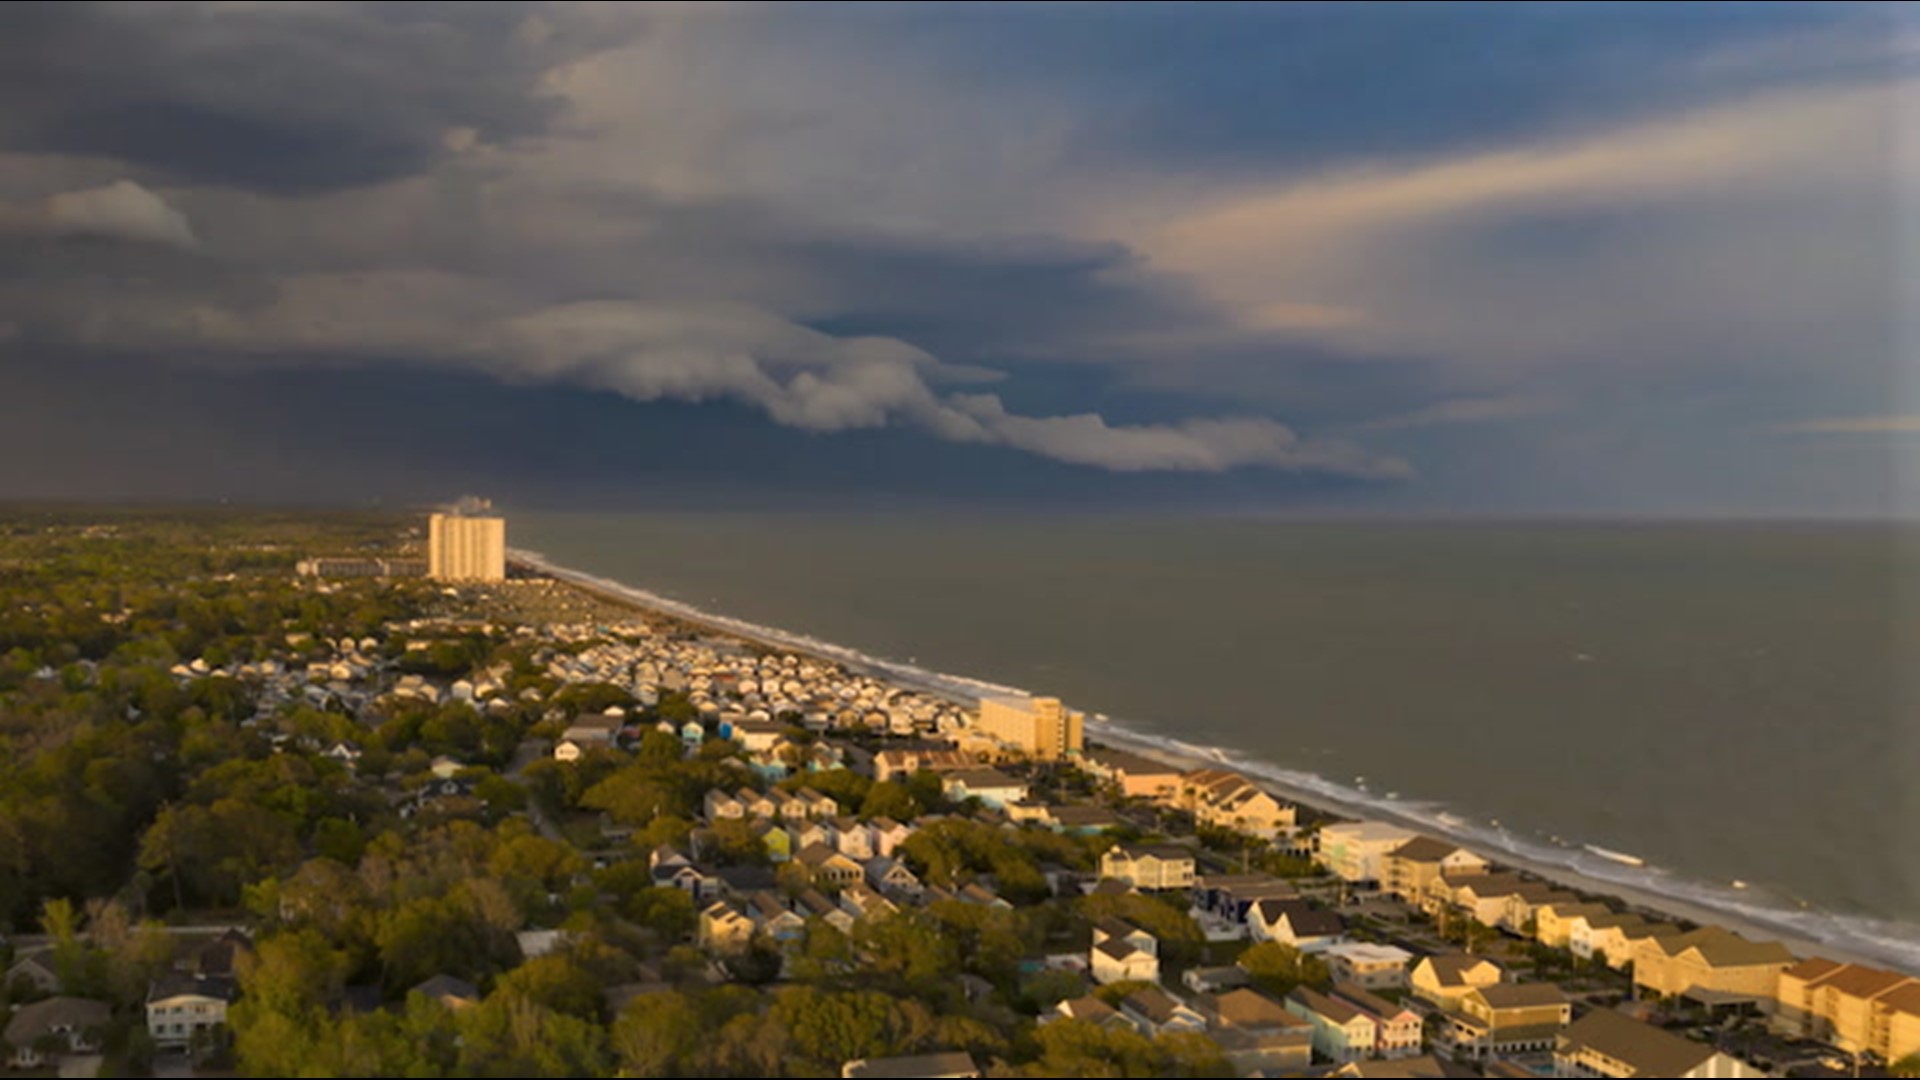 Watch this hyper-lapse video of the severe storms that rolled in over Myrtle Beach, South Carolina, on April 6.